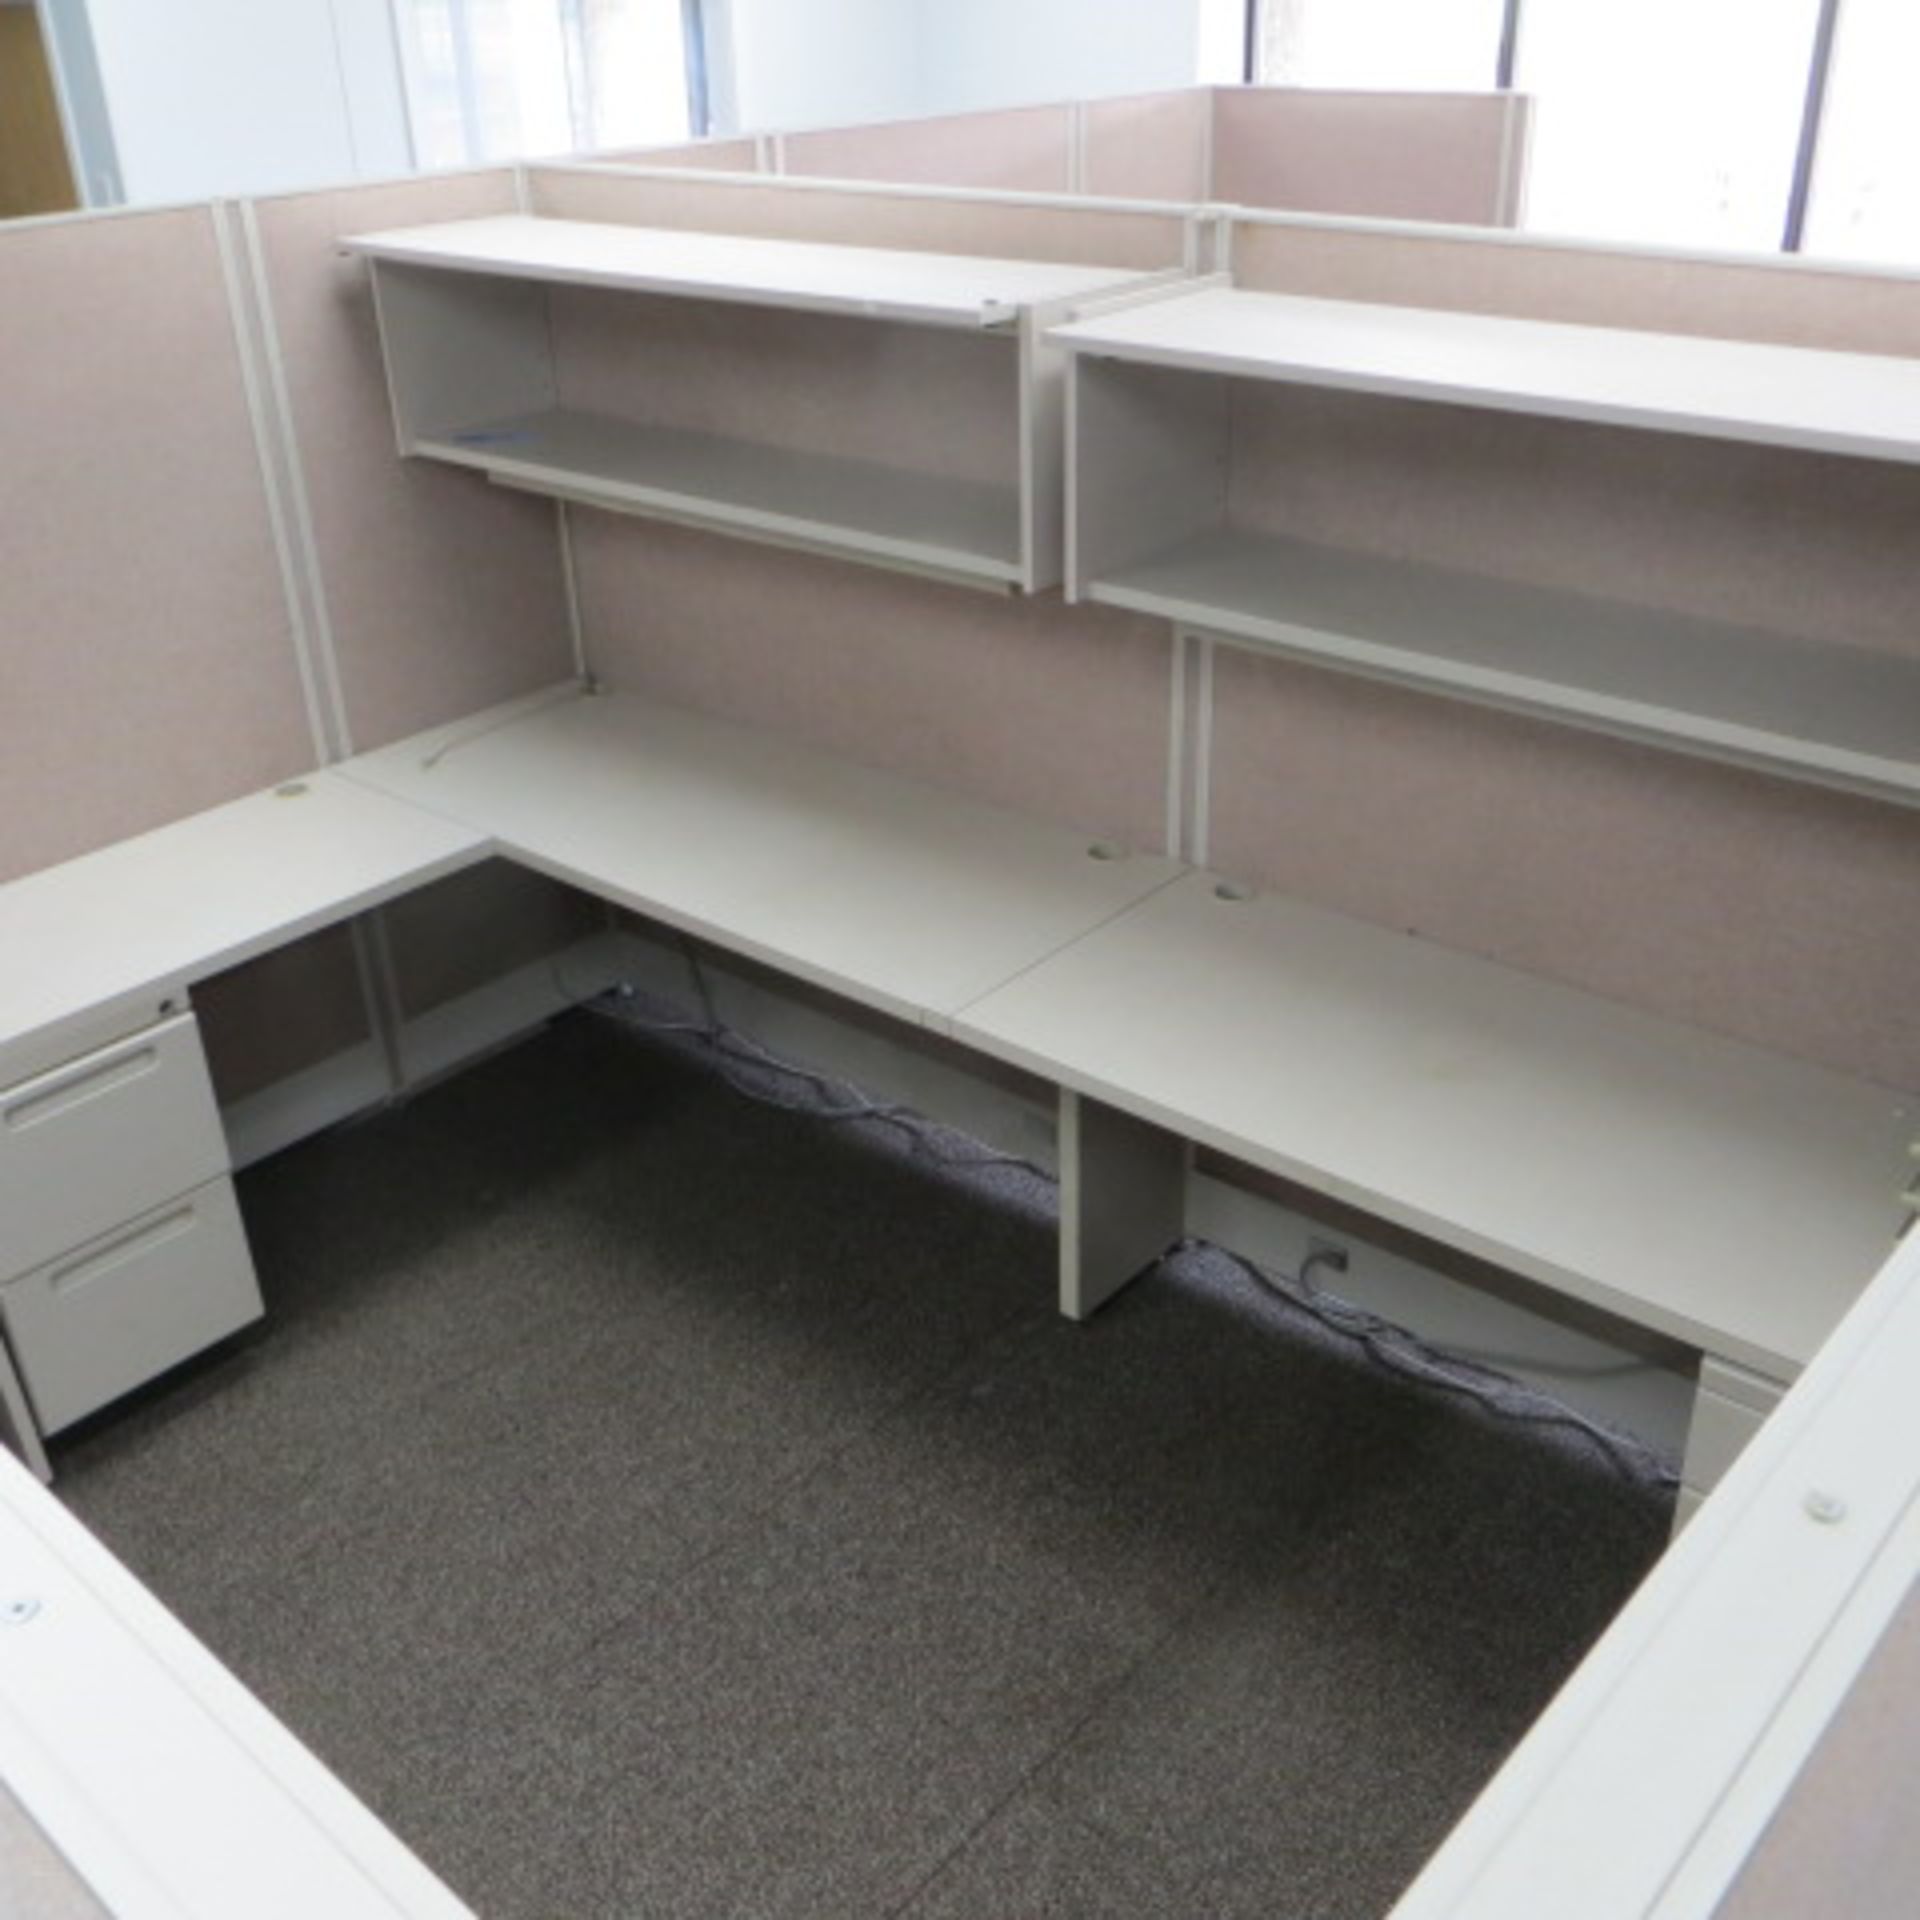 (4) 90 X 120 (APPROX) ACOUSTICAL PANEL WORKSTATIONS W/ WORK SURFACES, O/H SHELVES & PEDESTALS - Image 2 of 2